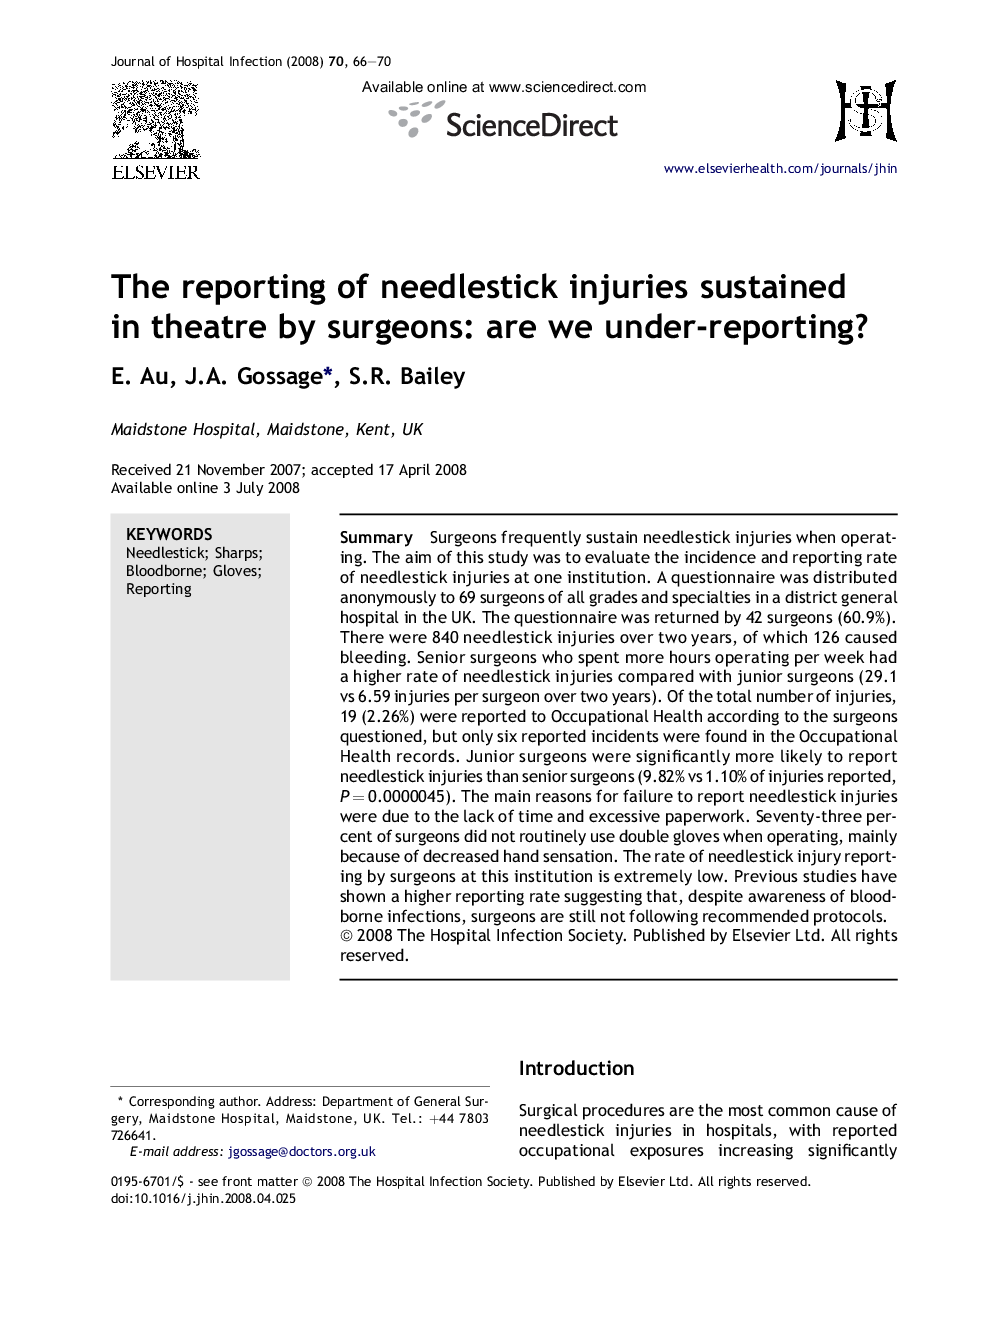 The reporting of needlestick injuries sustained in theatre by surgeons: are we under-reporting?